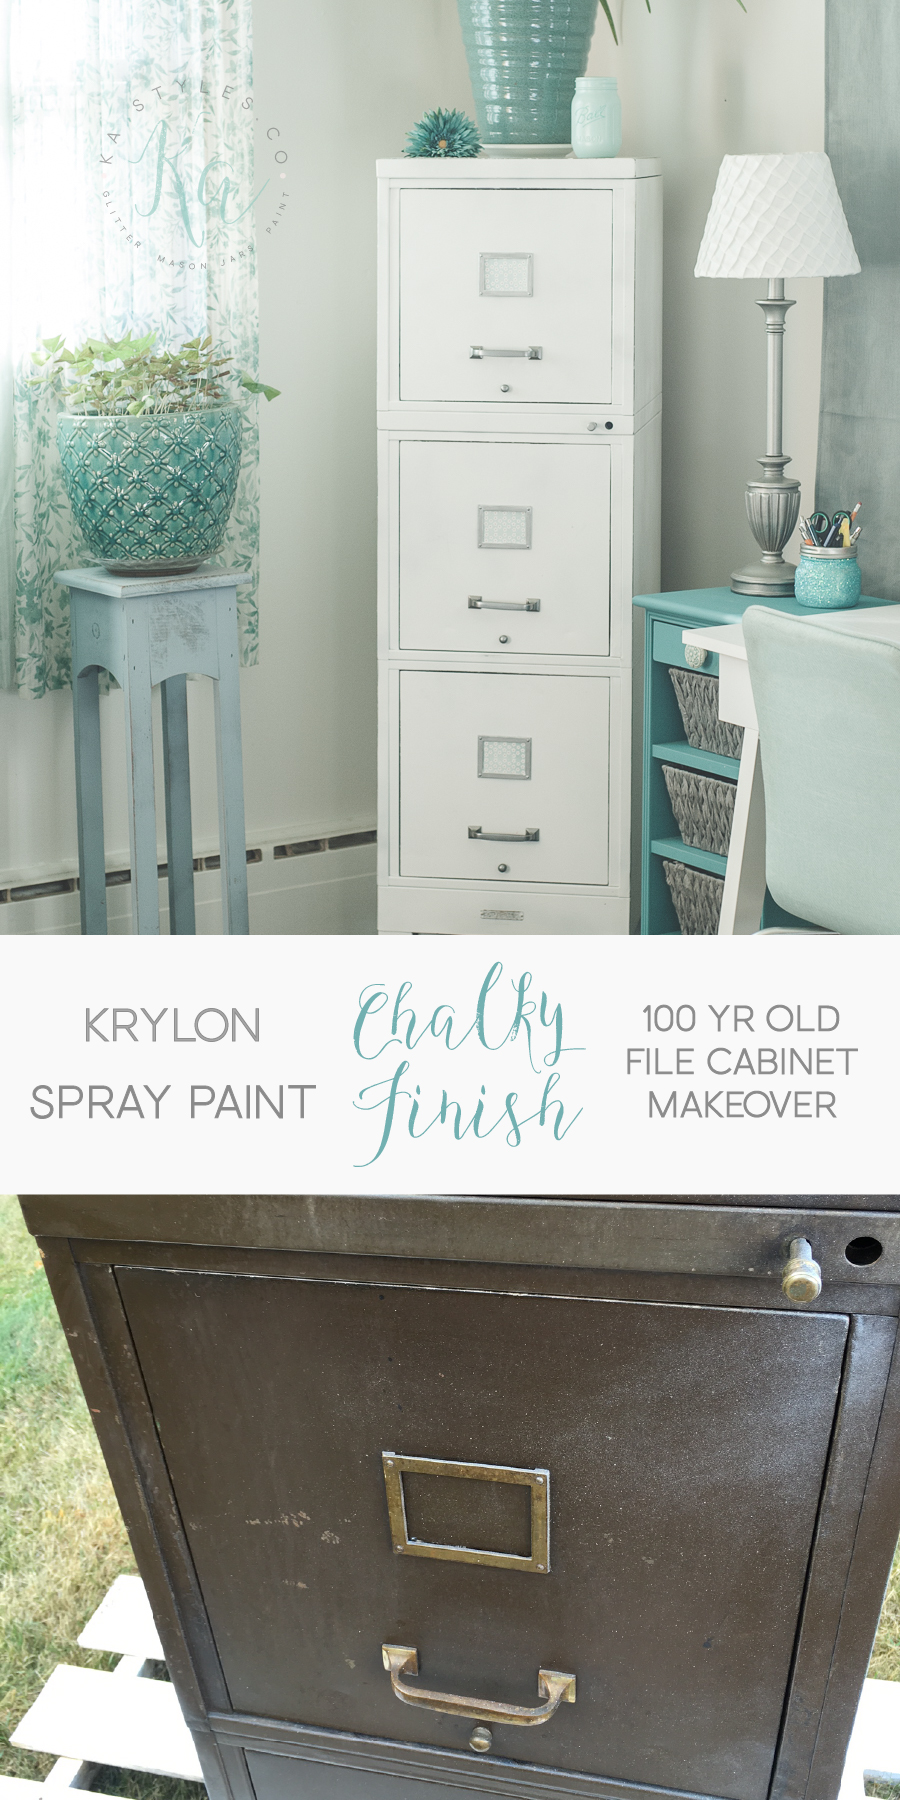 Krylon Chalky Finish spray paint file cabinet makeover.